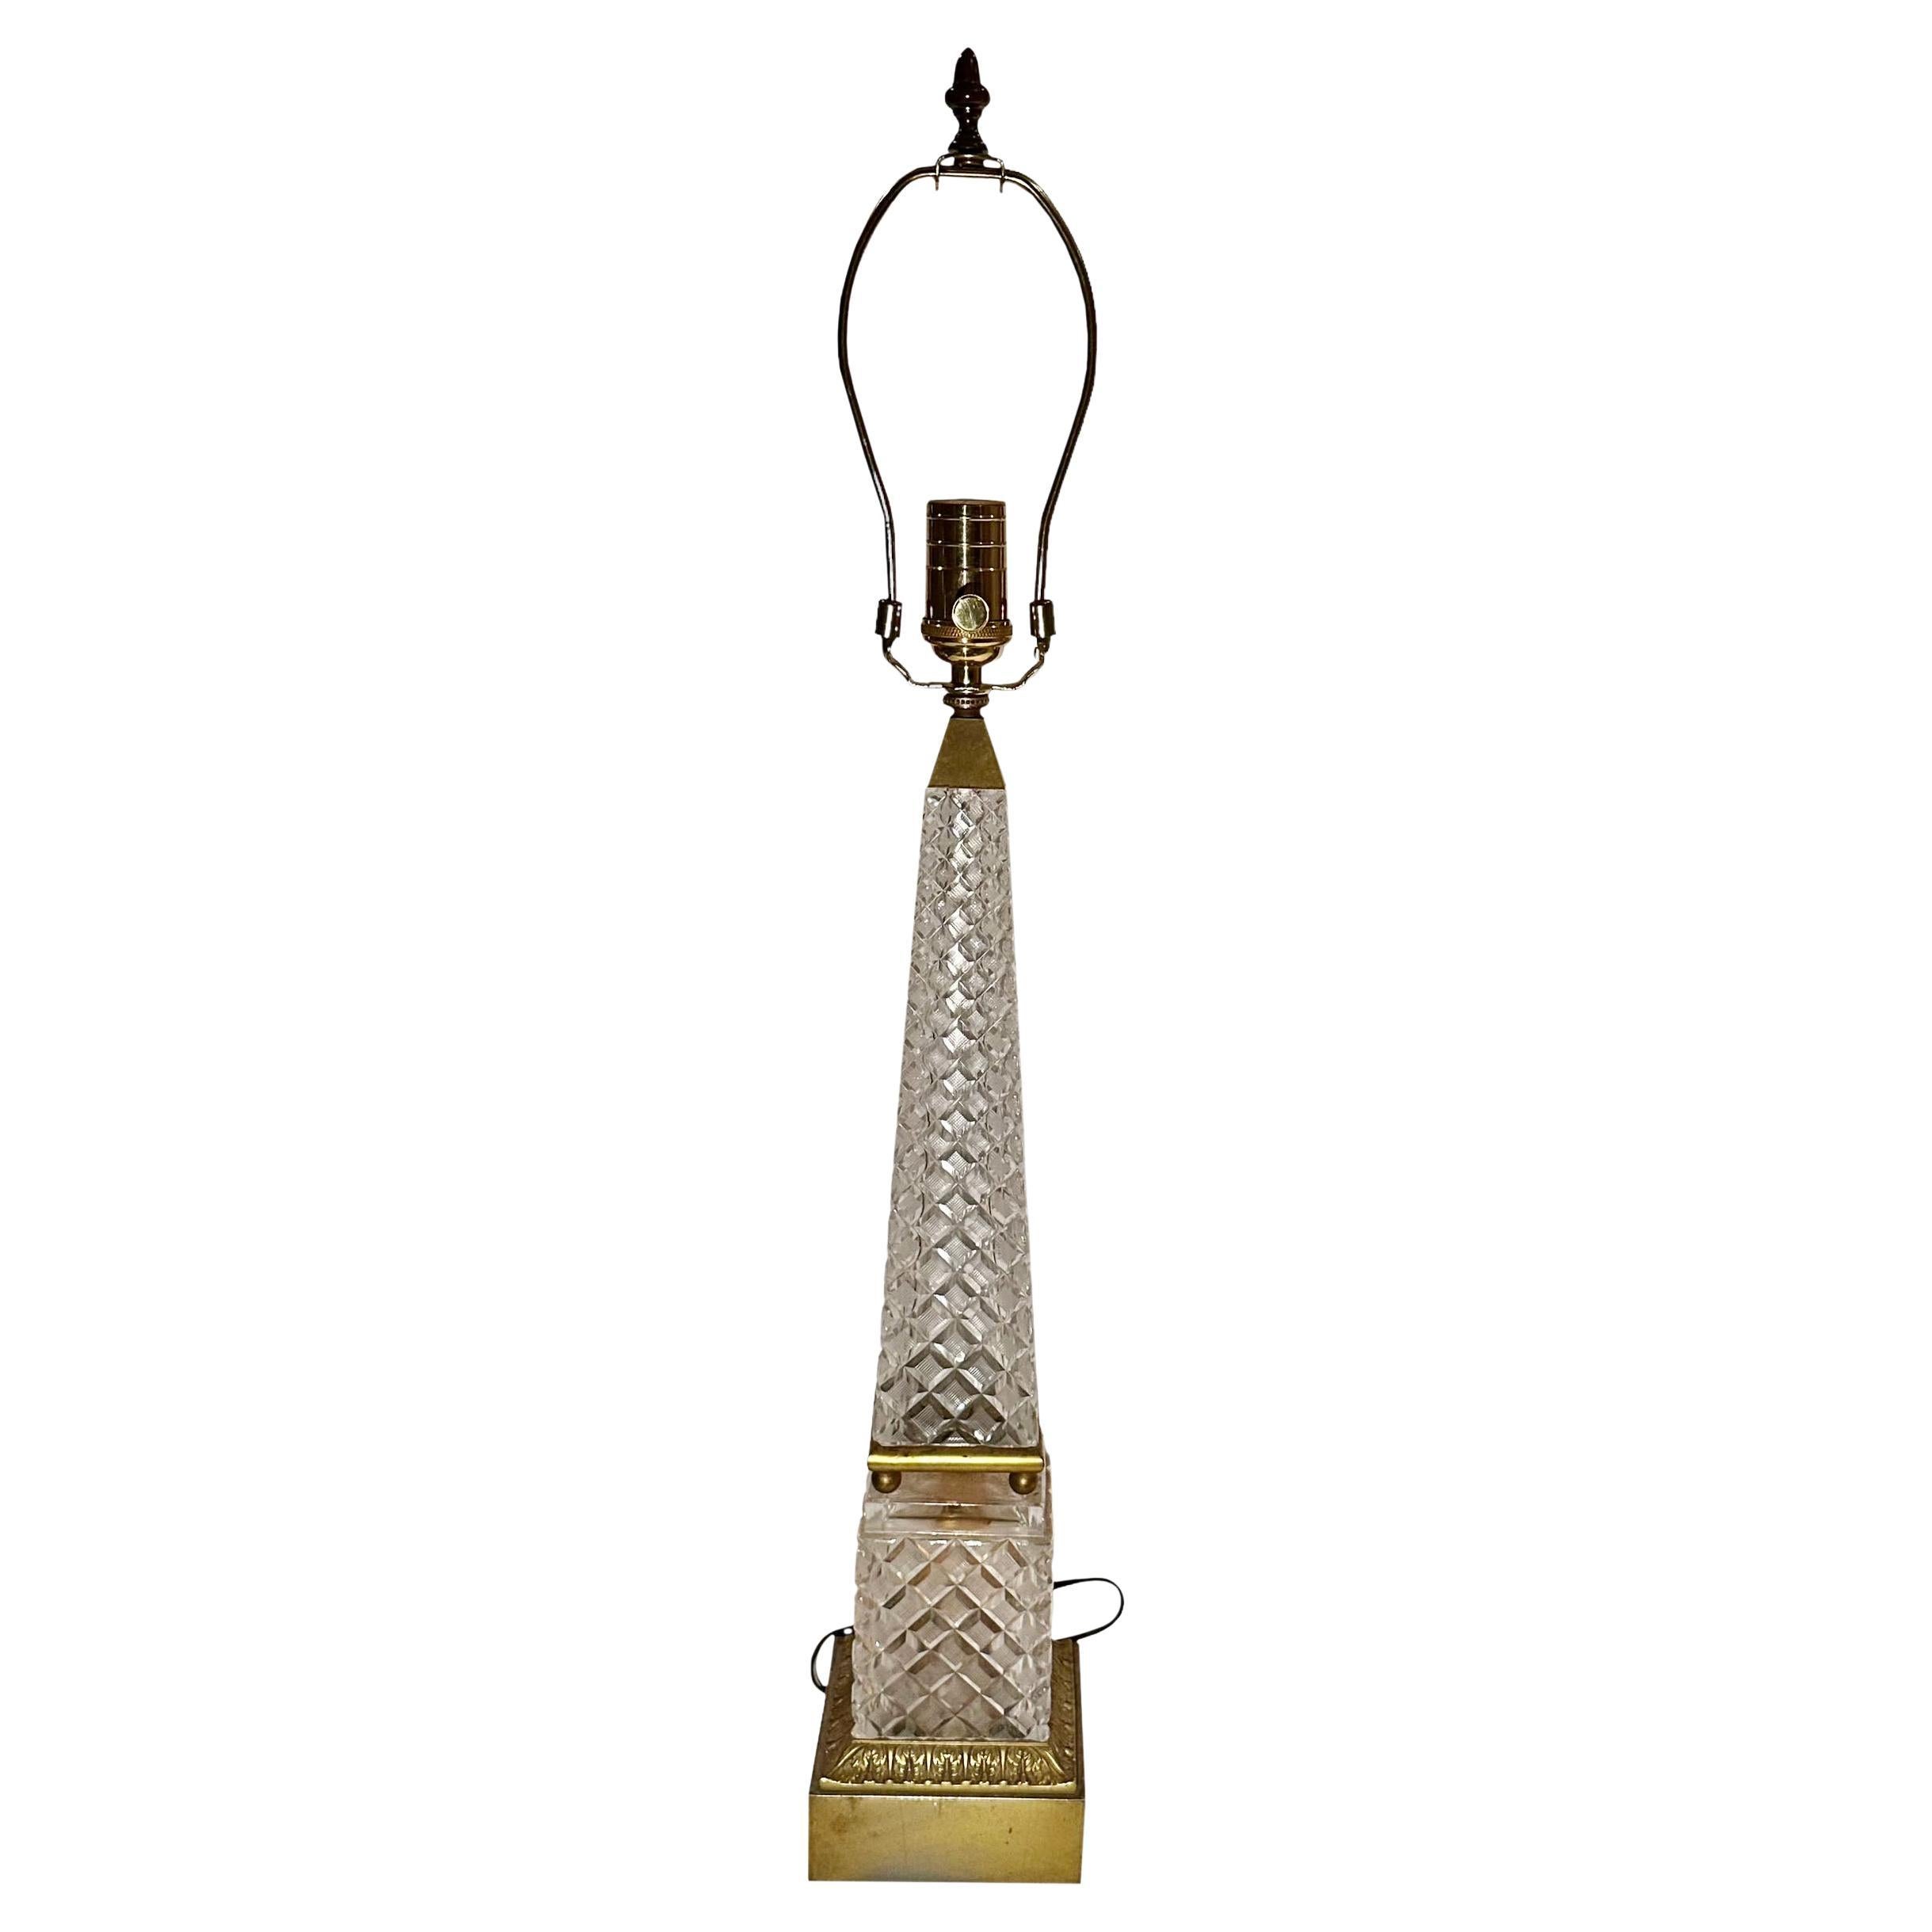 An exquisite obelisk crystal lamp by Baccarat. It is all crystal with a bronze dore cornucopia finial. Newly rewired and has a very high quality socket and silk cord.